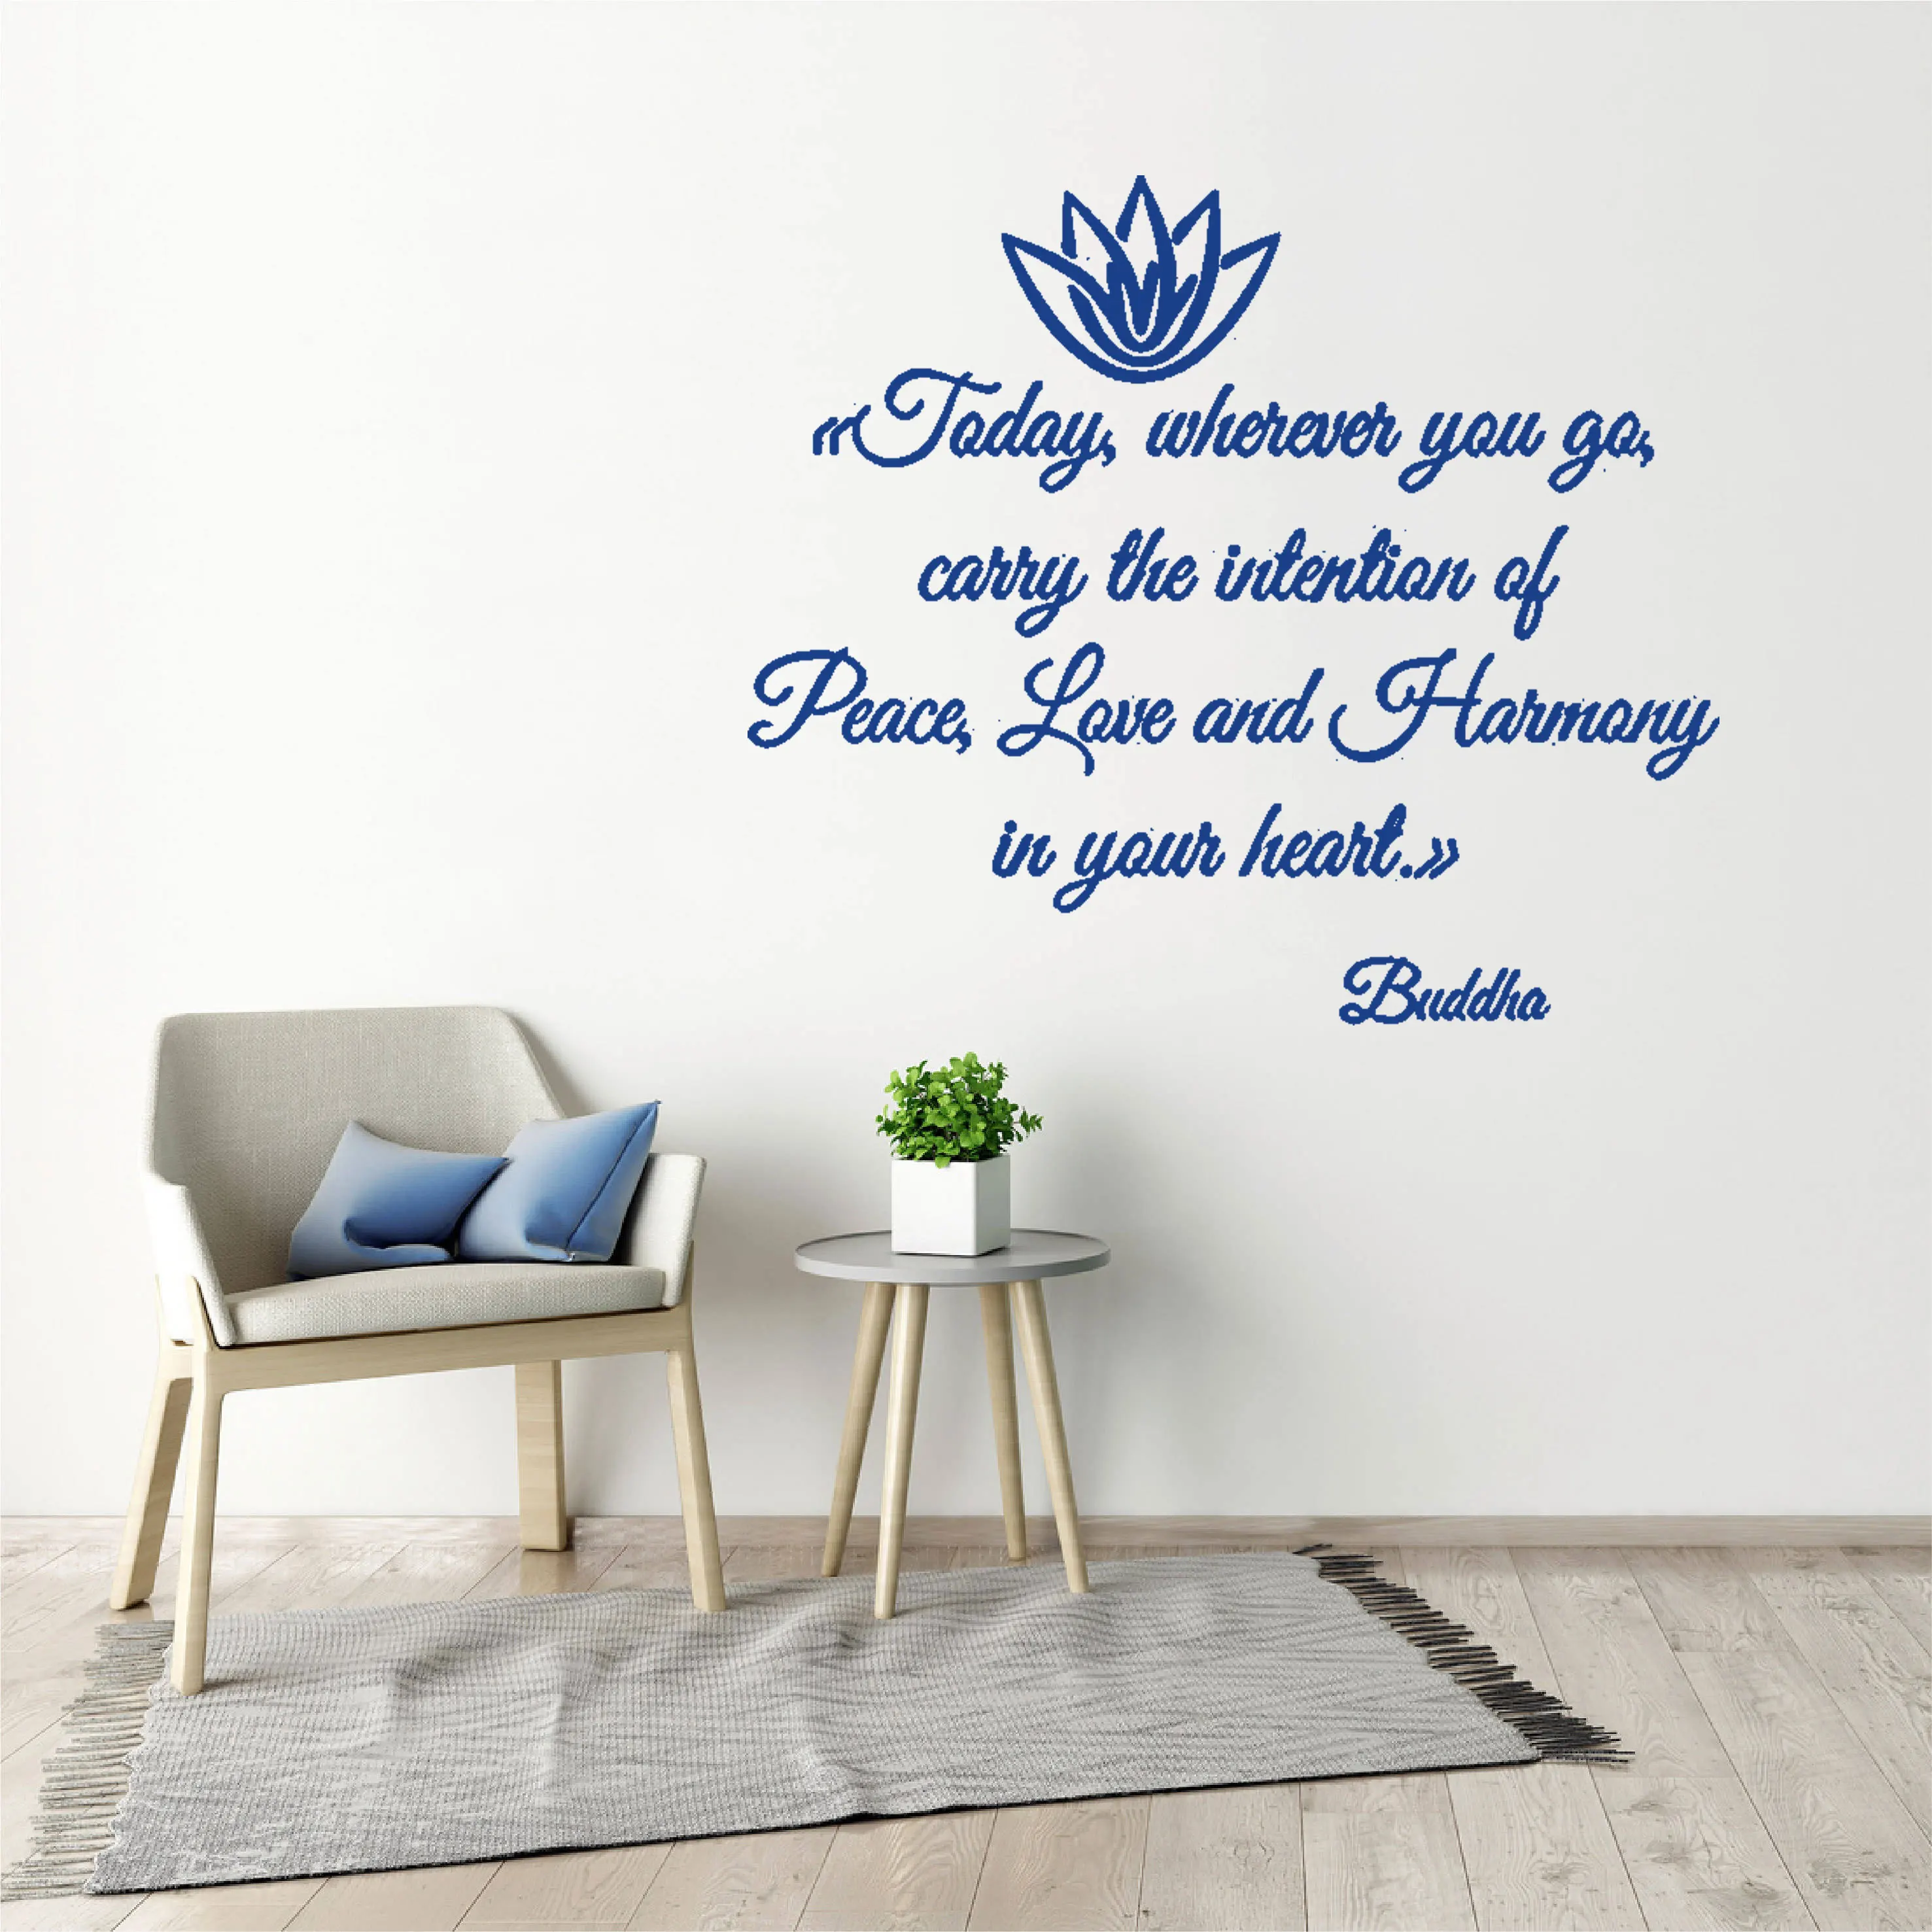 

Religious Culture Temple Quotes Buddha Wall Sticker Yoga Vinyl Home Decor Living Room Bedrom Decals Removable Murals DW12628